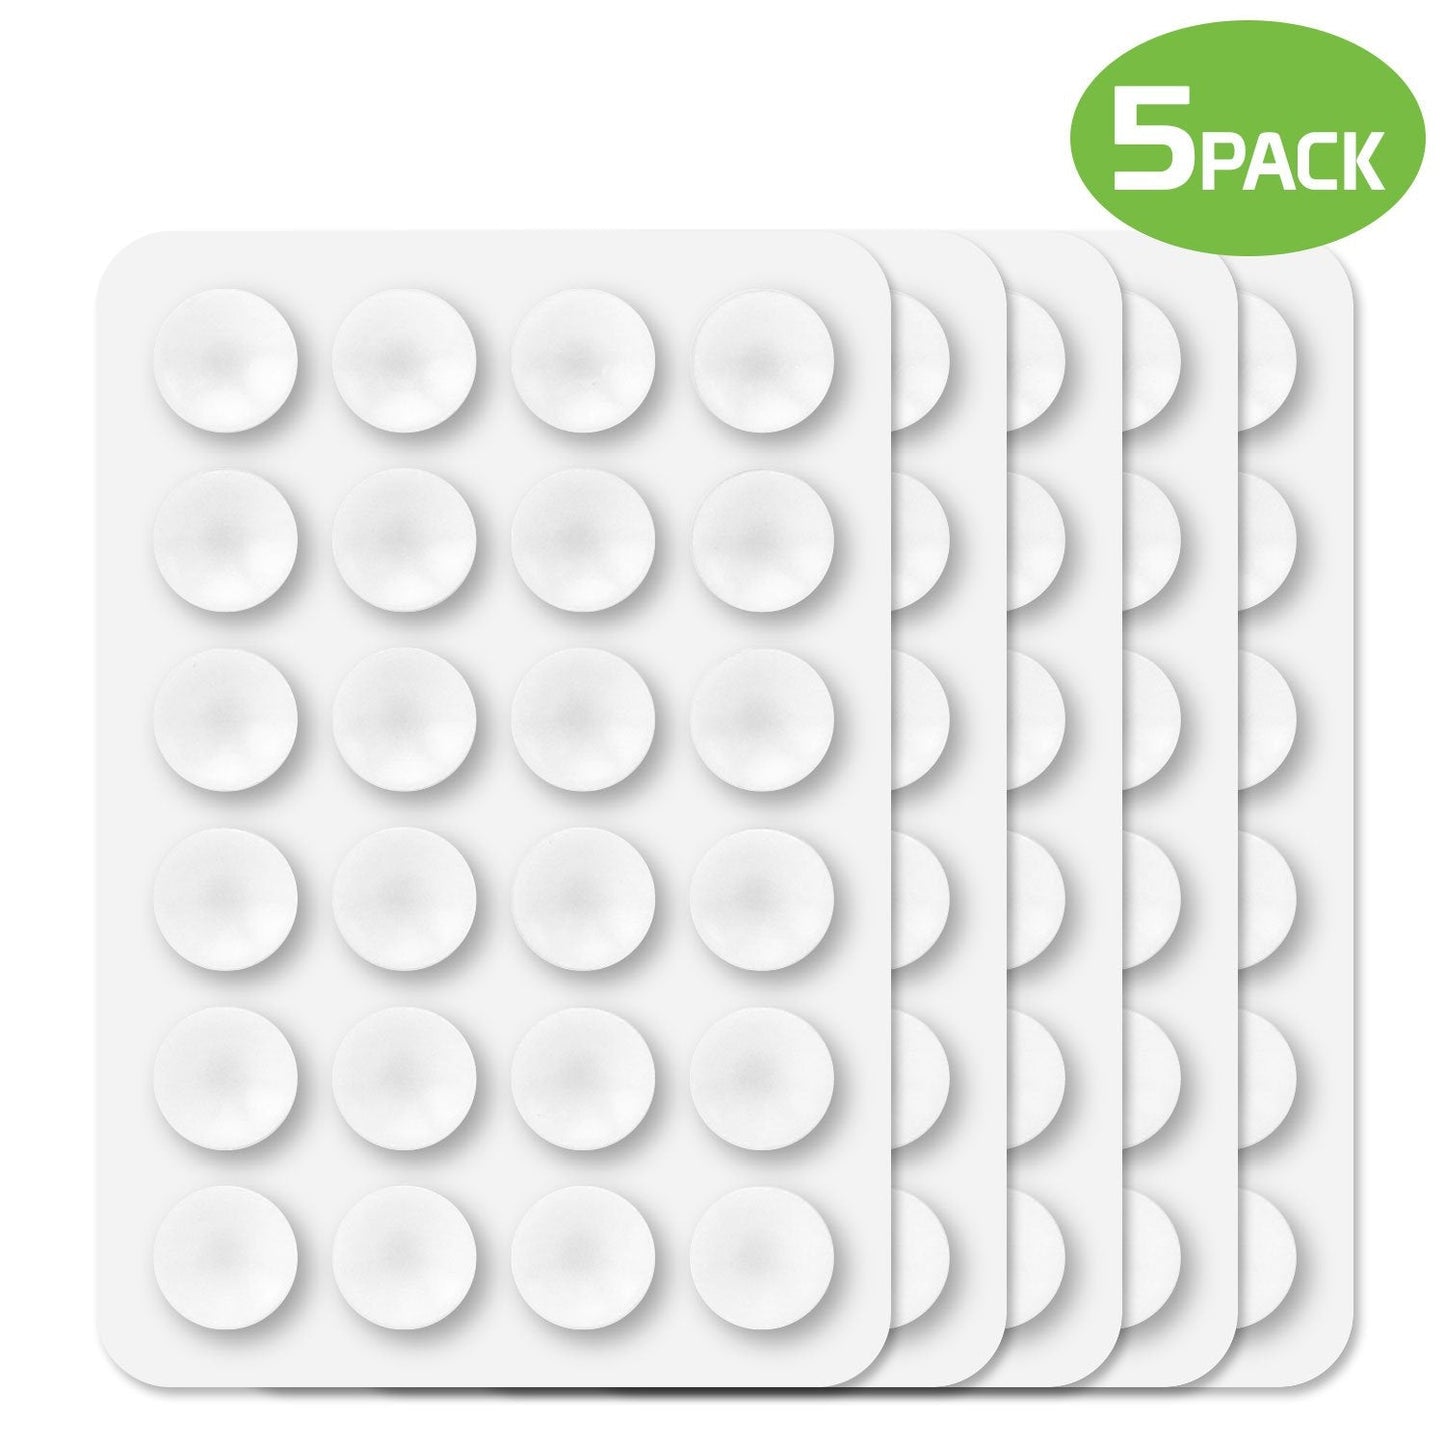 SCUPCL5 - 5 Pack Multipurpose Mini Suction Cup Mat with Strong 3M Adhesive - by Cellet - Clear